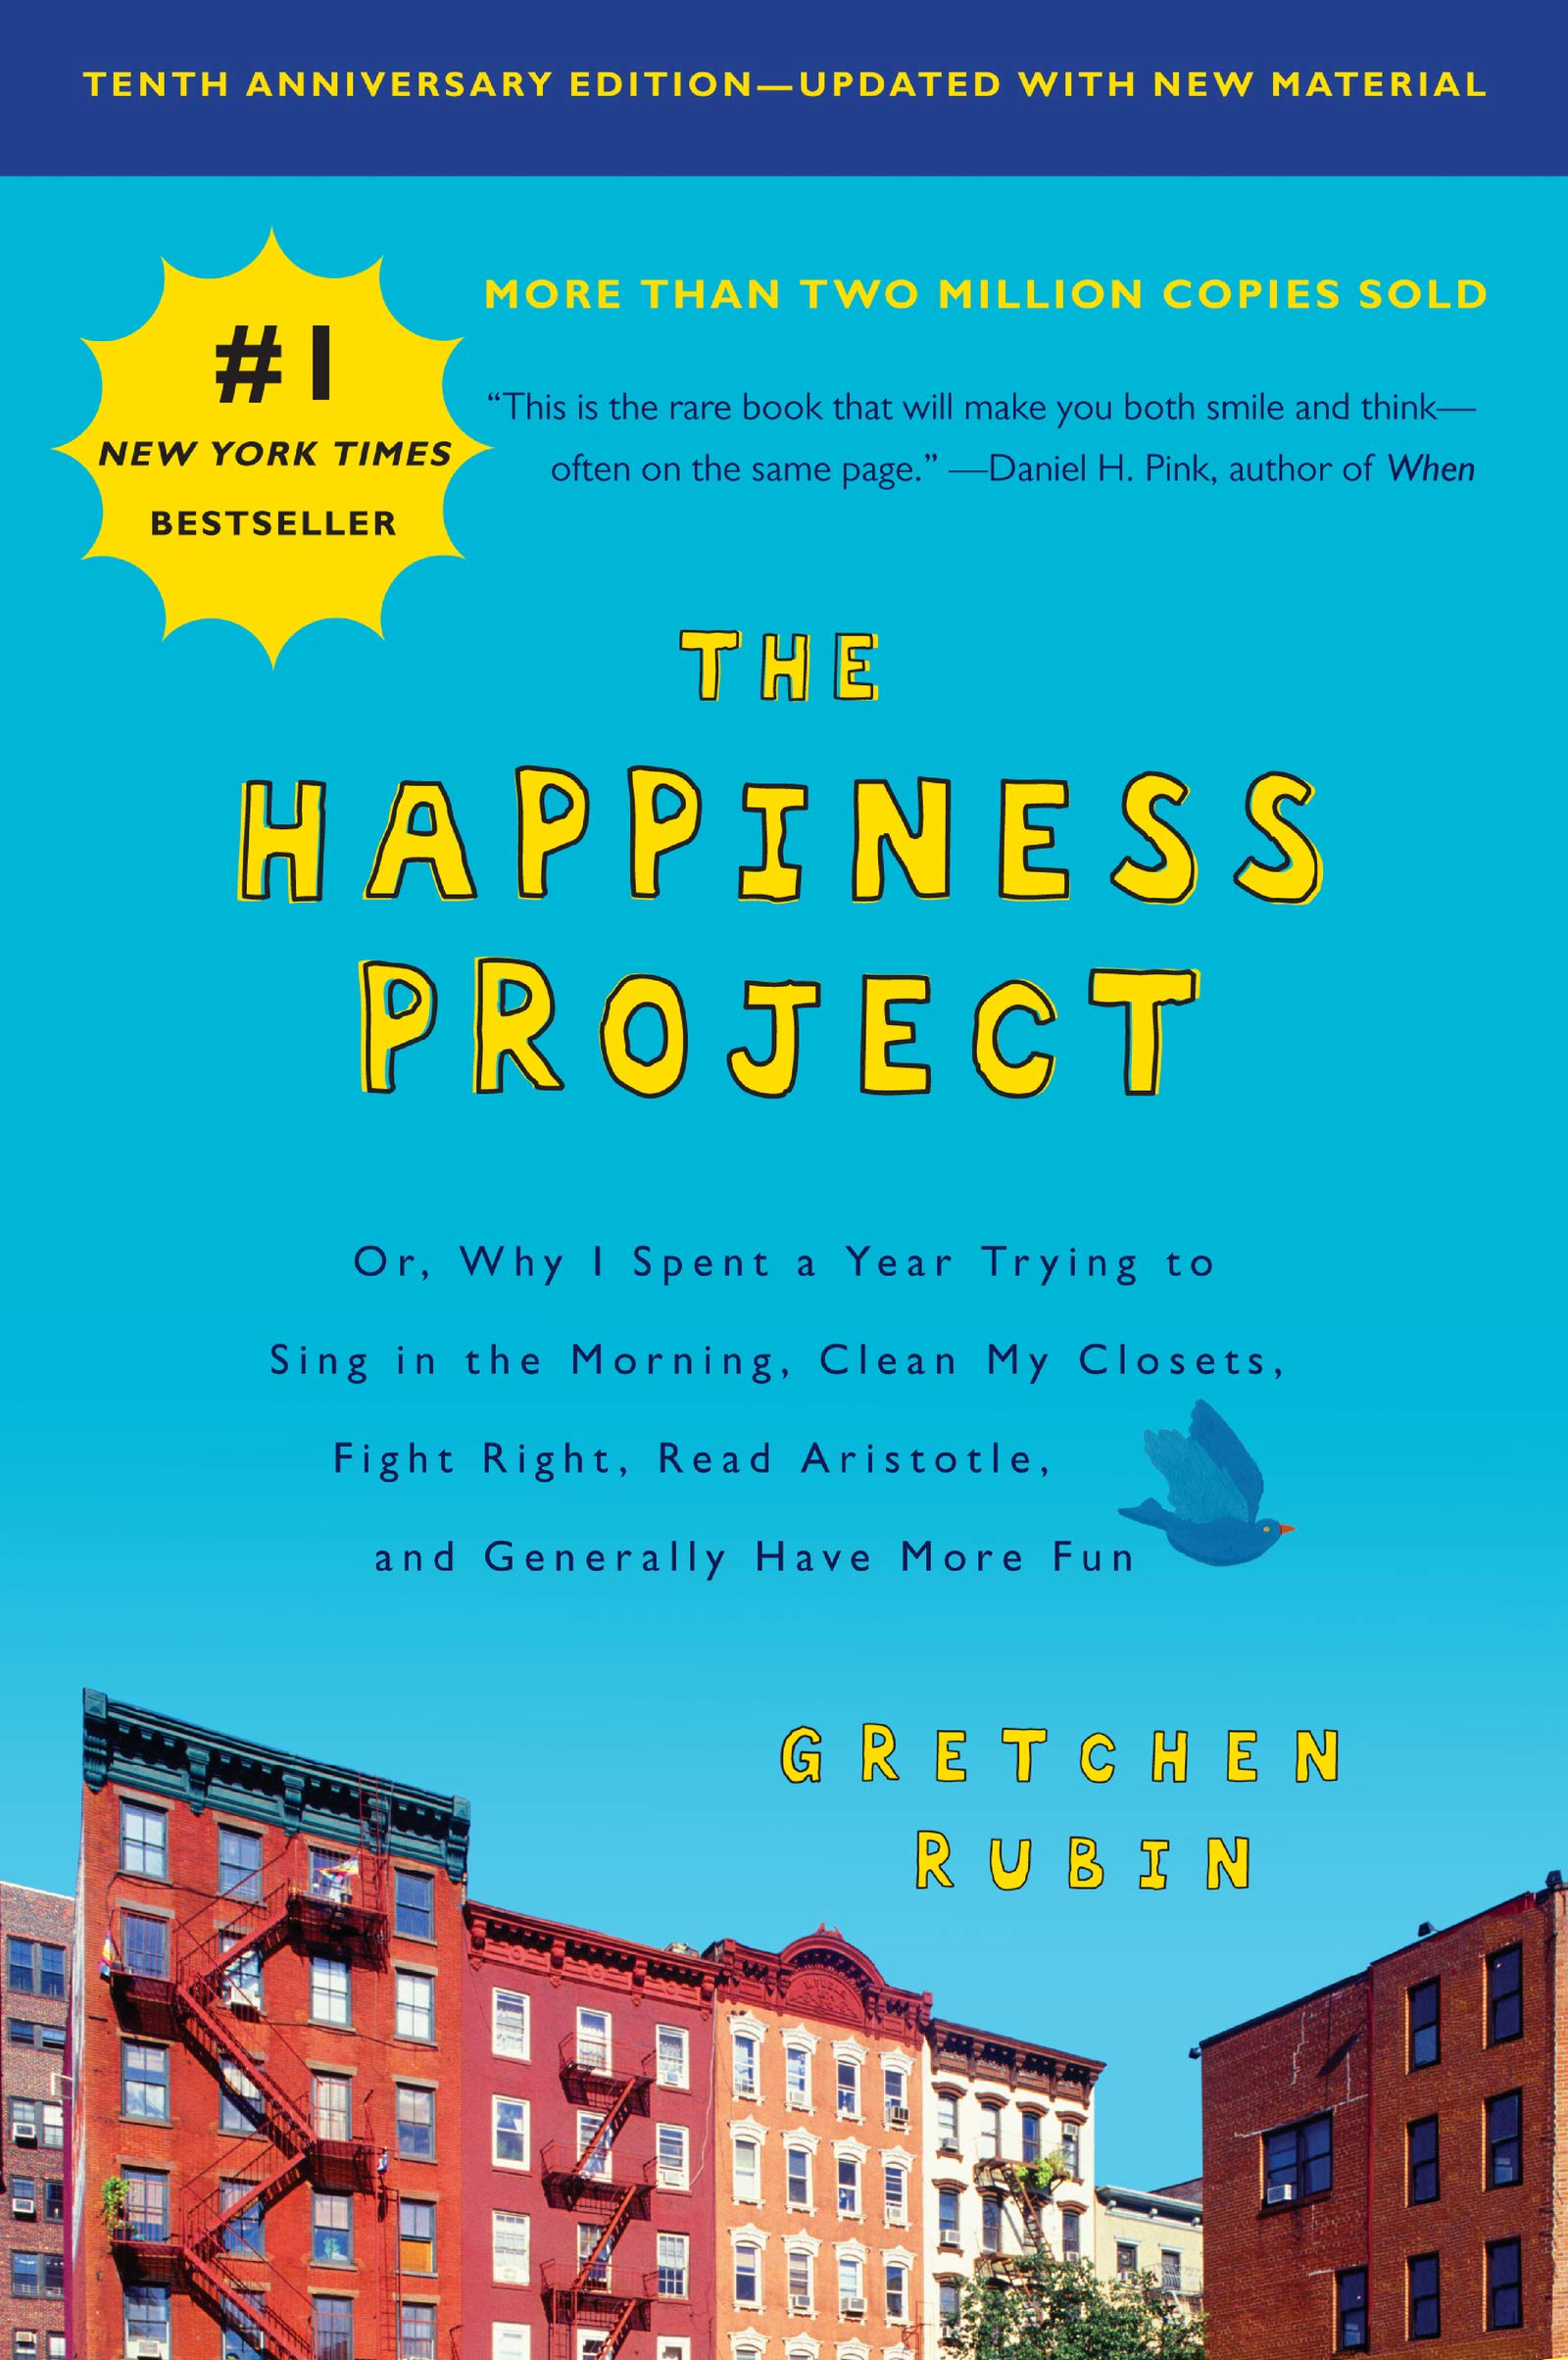 'The Happiness Project' by Gretchen Rubin